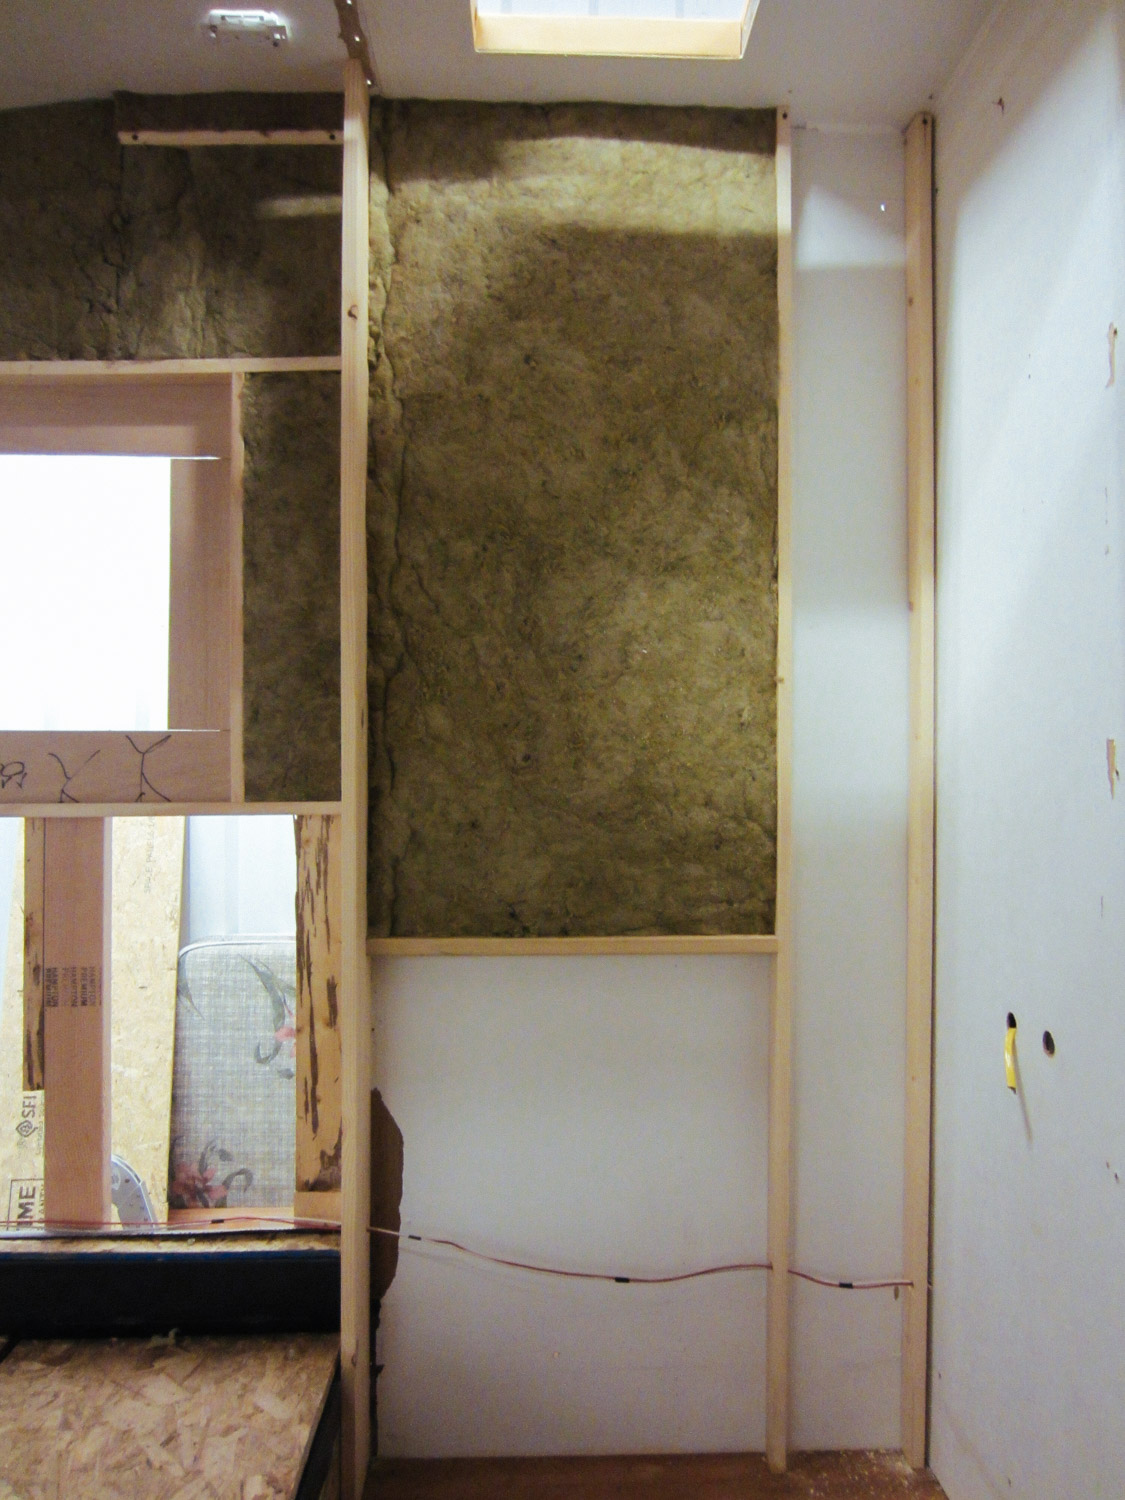  We added studs to the shower wall so we could insulate that space with mineral wool. 